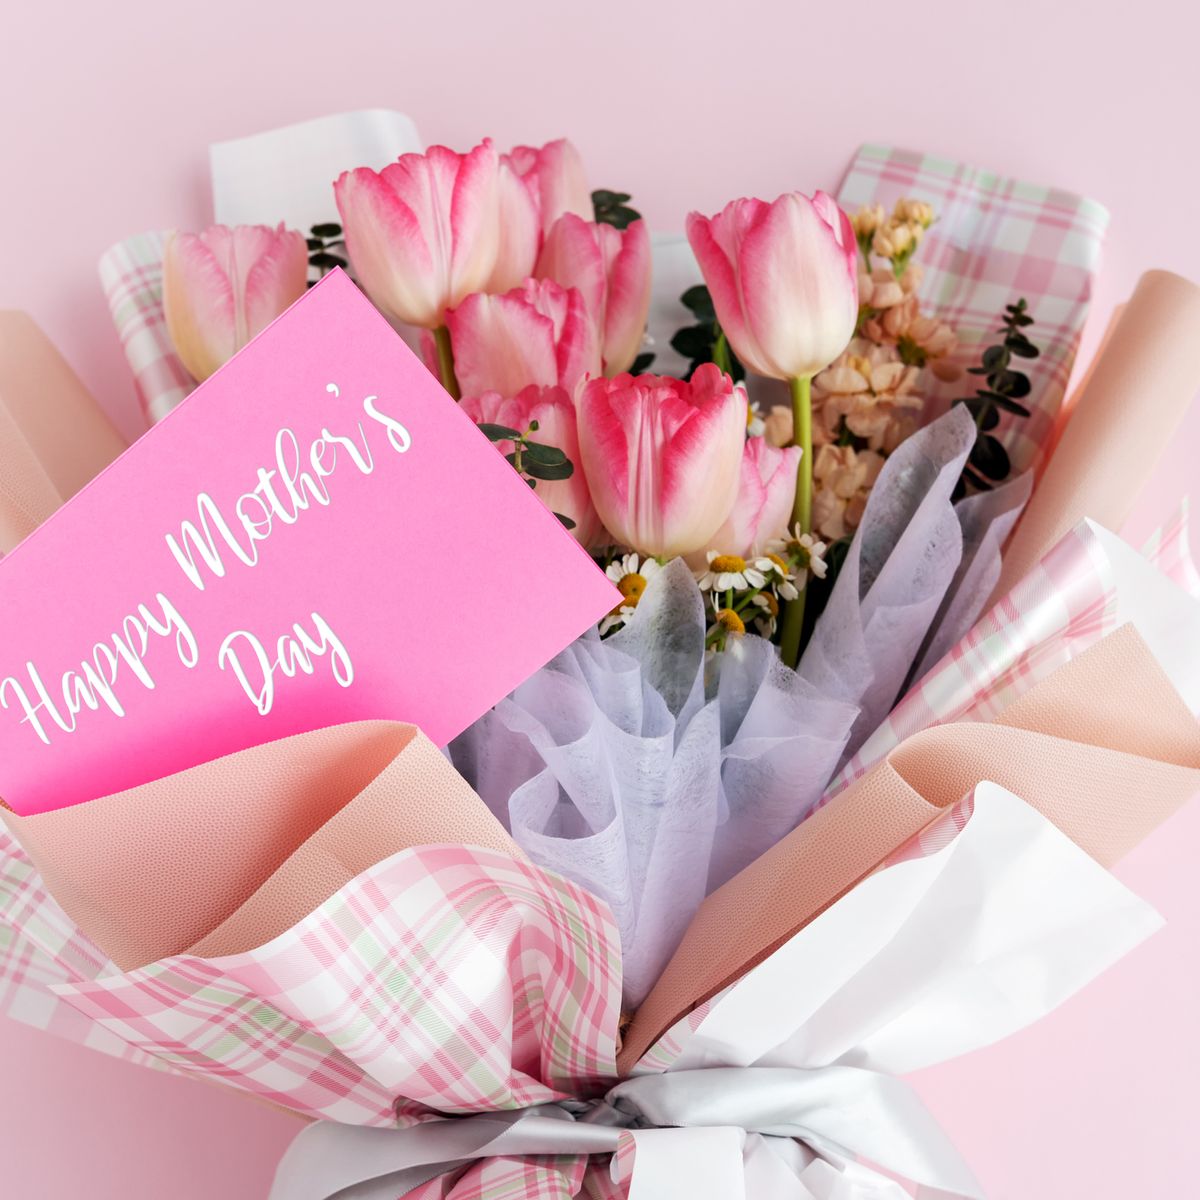 Dear Mom! funny gift for mother's day Thanks for not giving up on